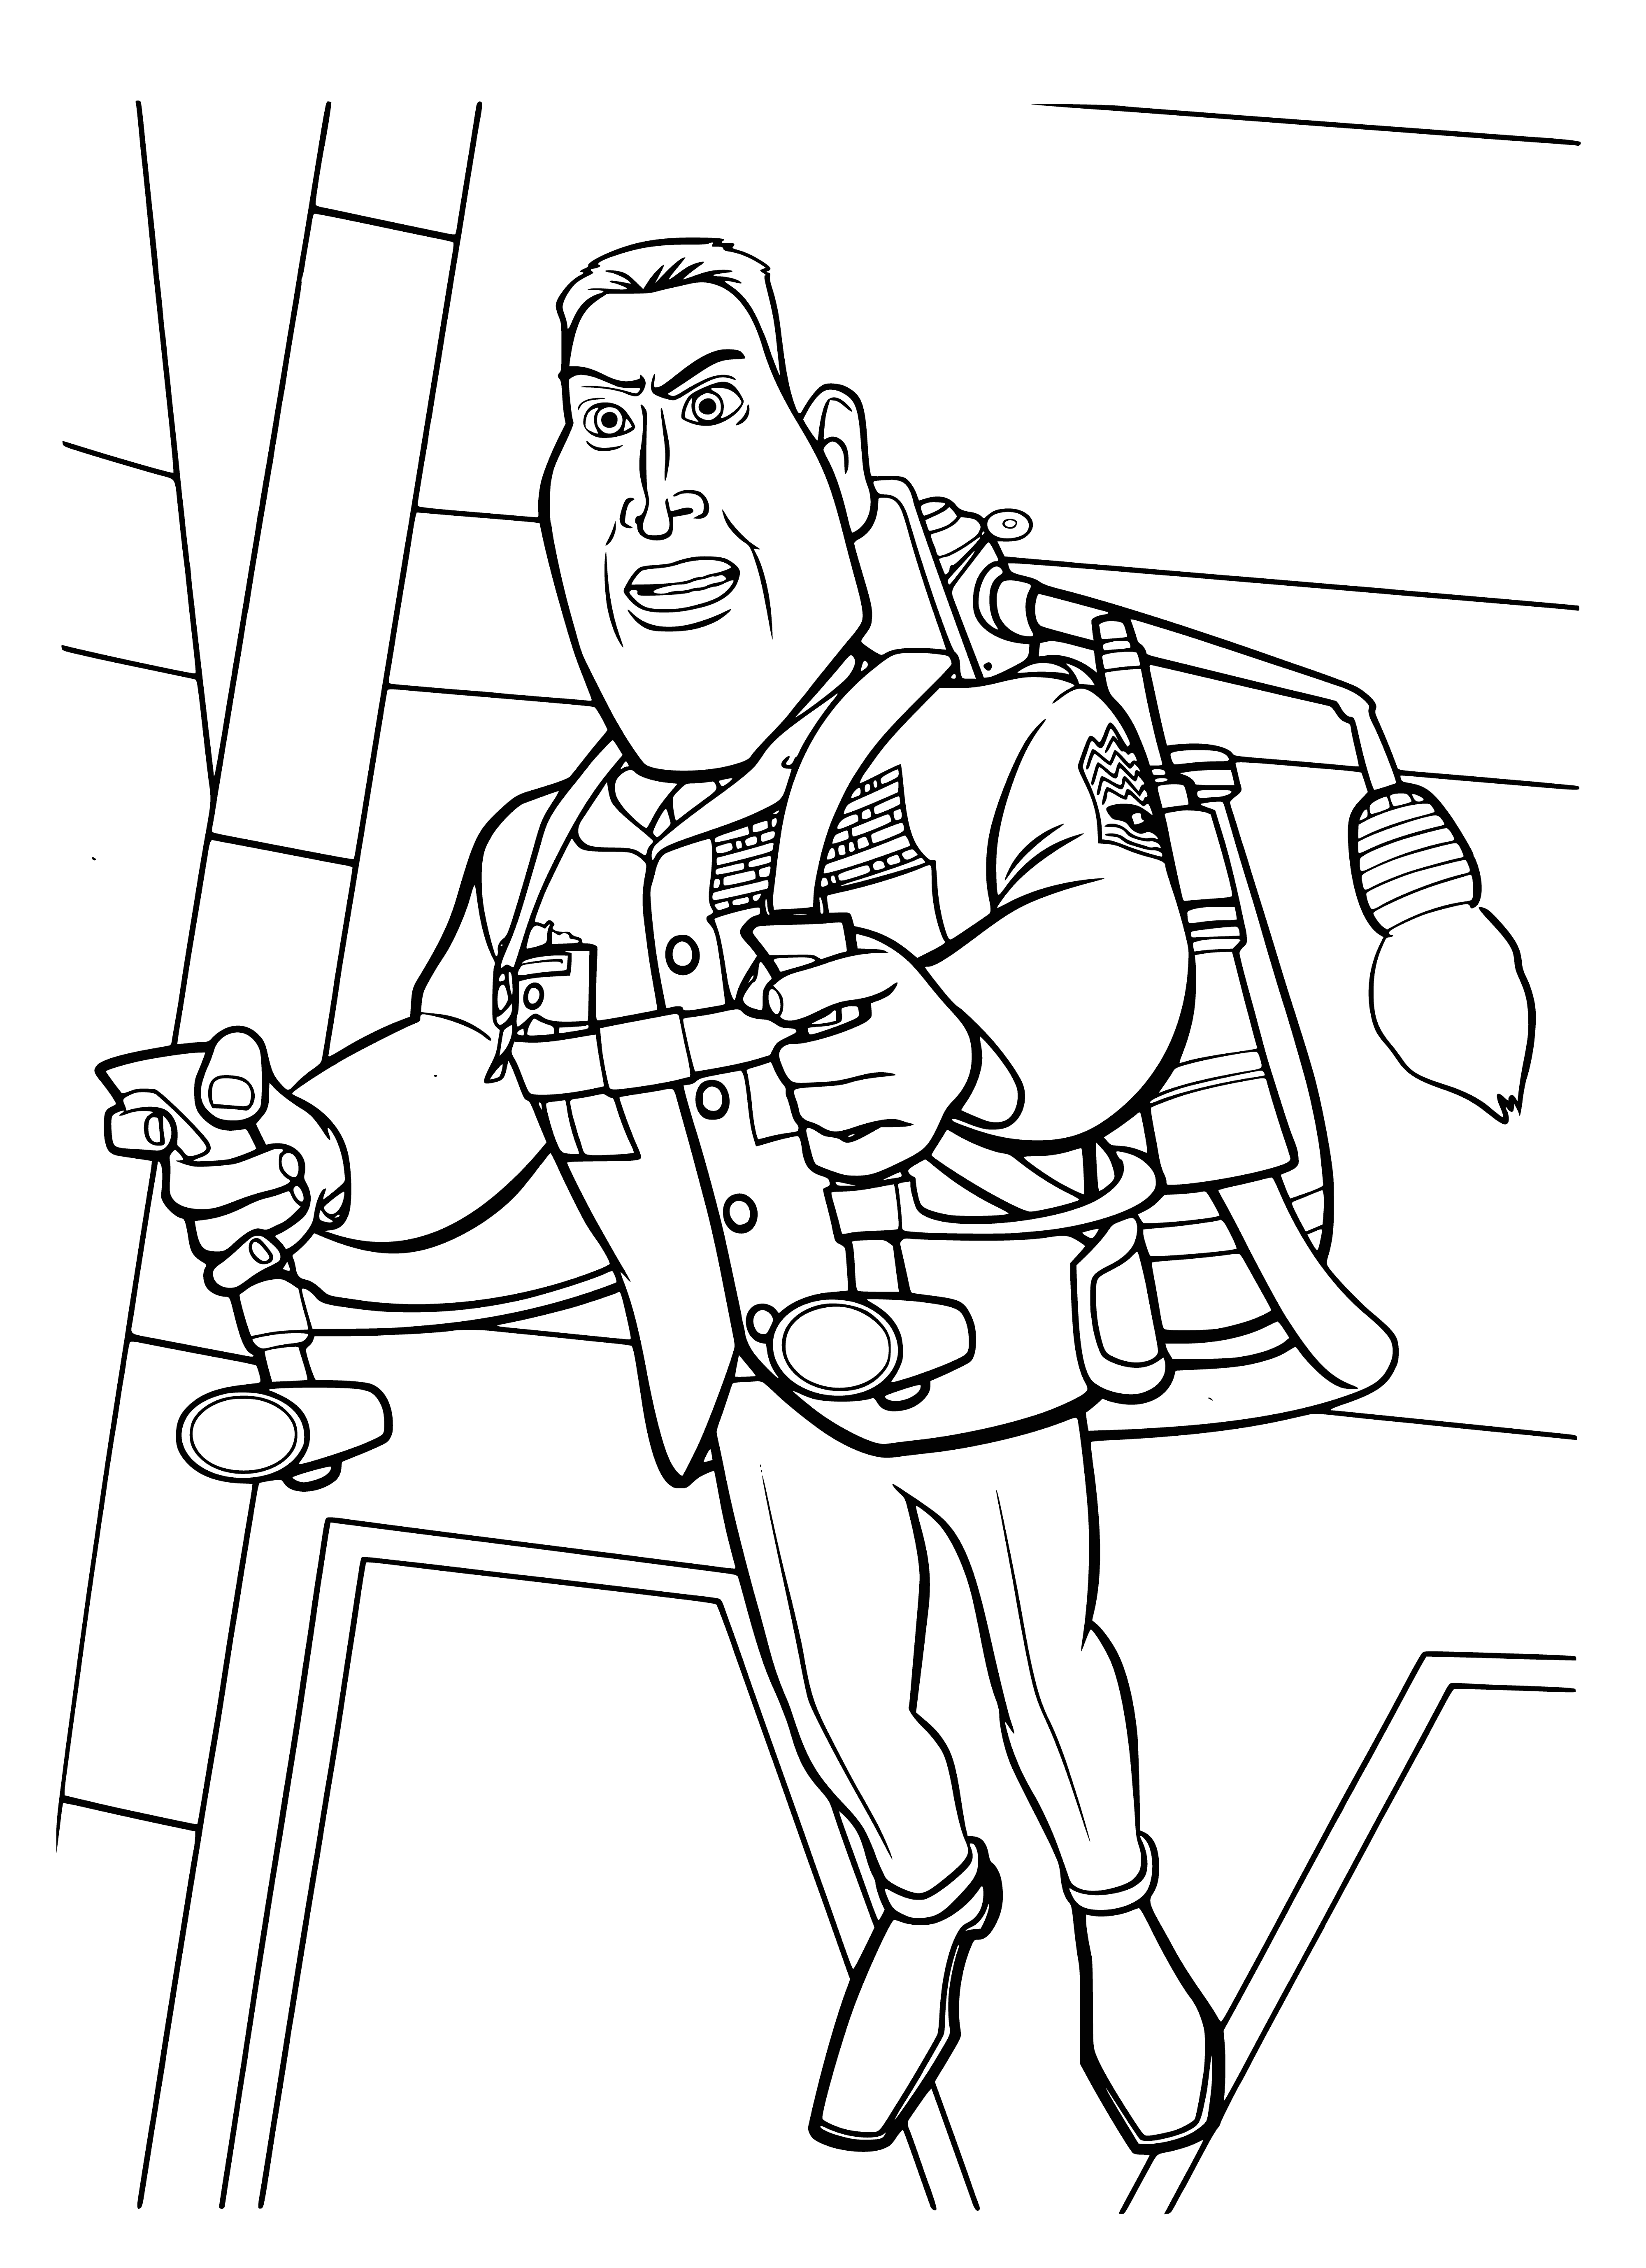 coloring page: An alien creature, General Voyaker, stands tall with gun and sword in hand, large purple cape and rubble at feet. (#monstersvsaliens)